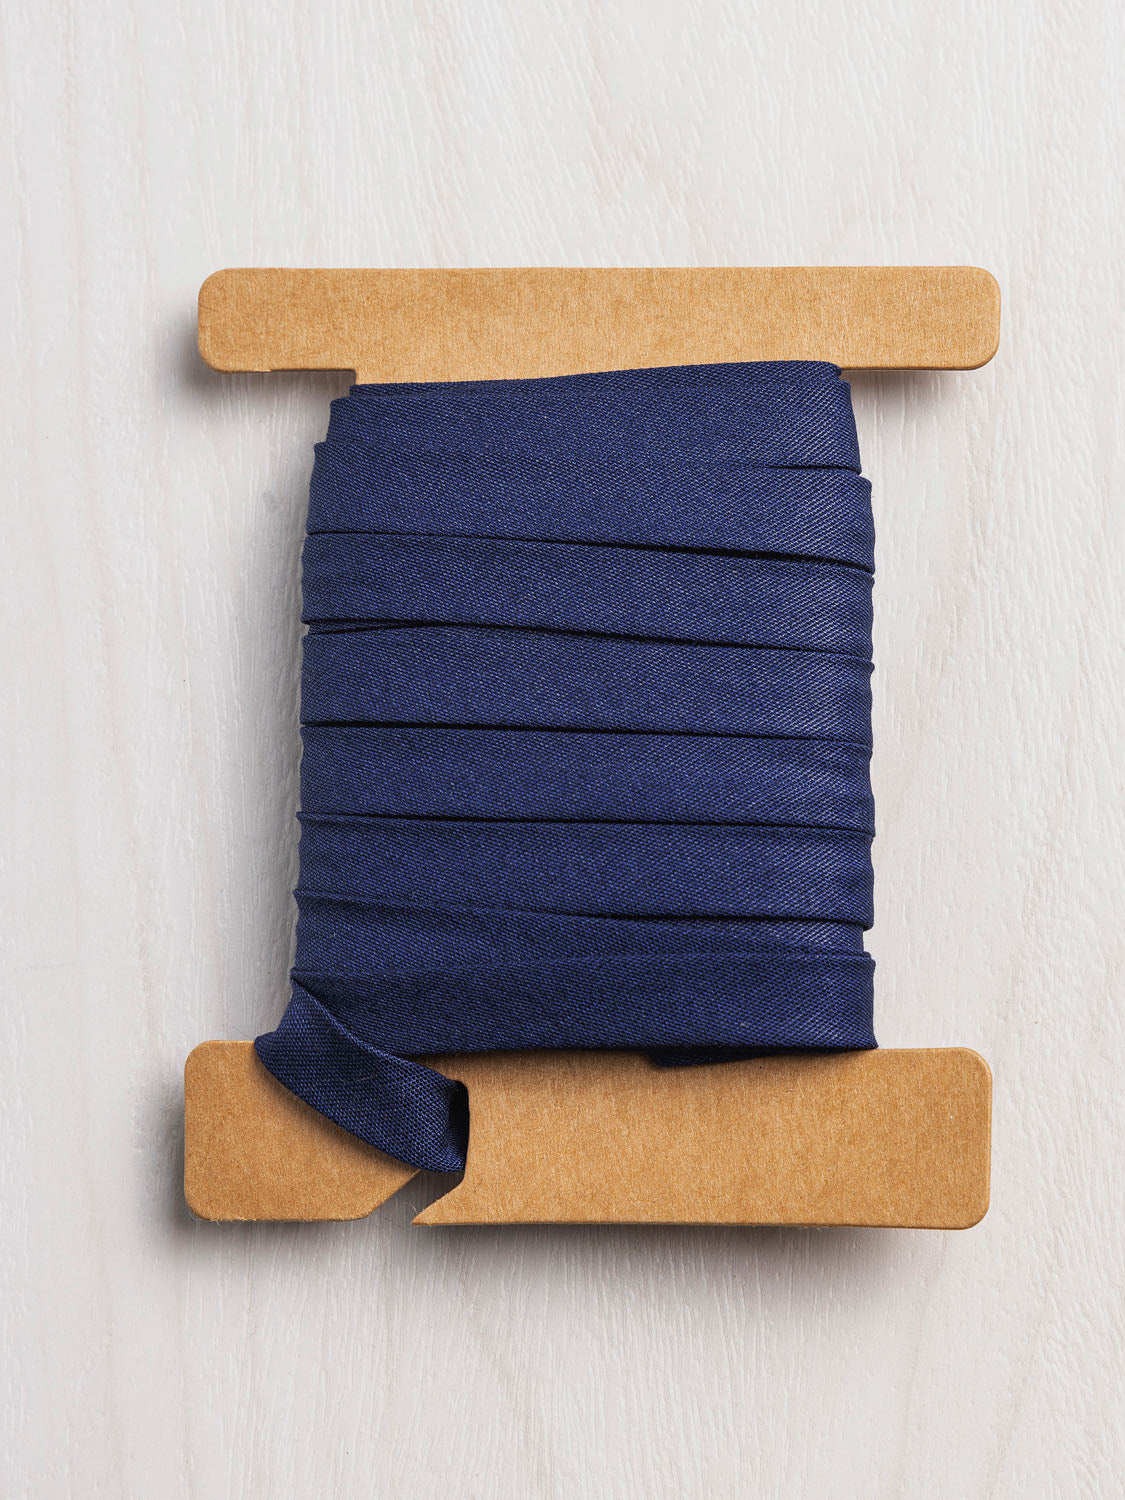 ISSUE 9 - ATTACHING DOUBLE FOLD BIAS BINDING — In the Folds